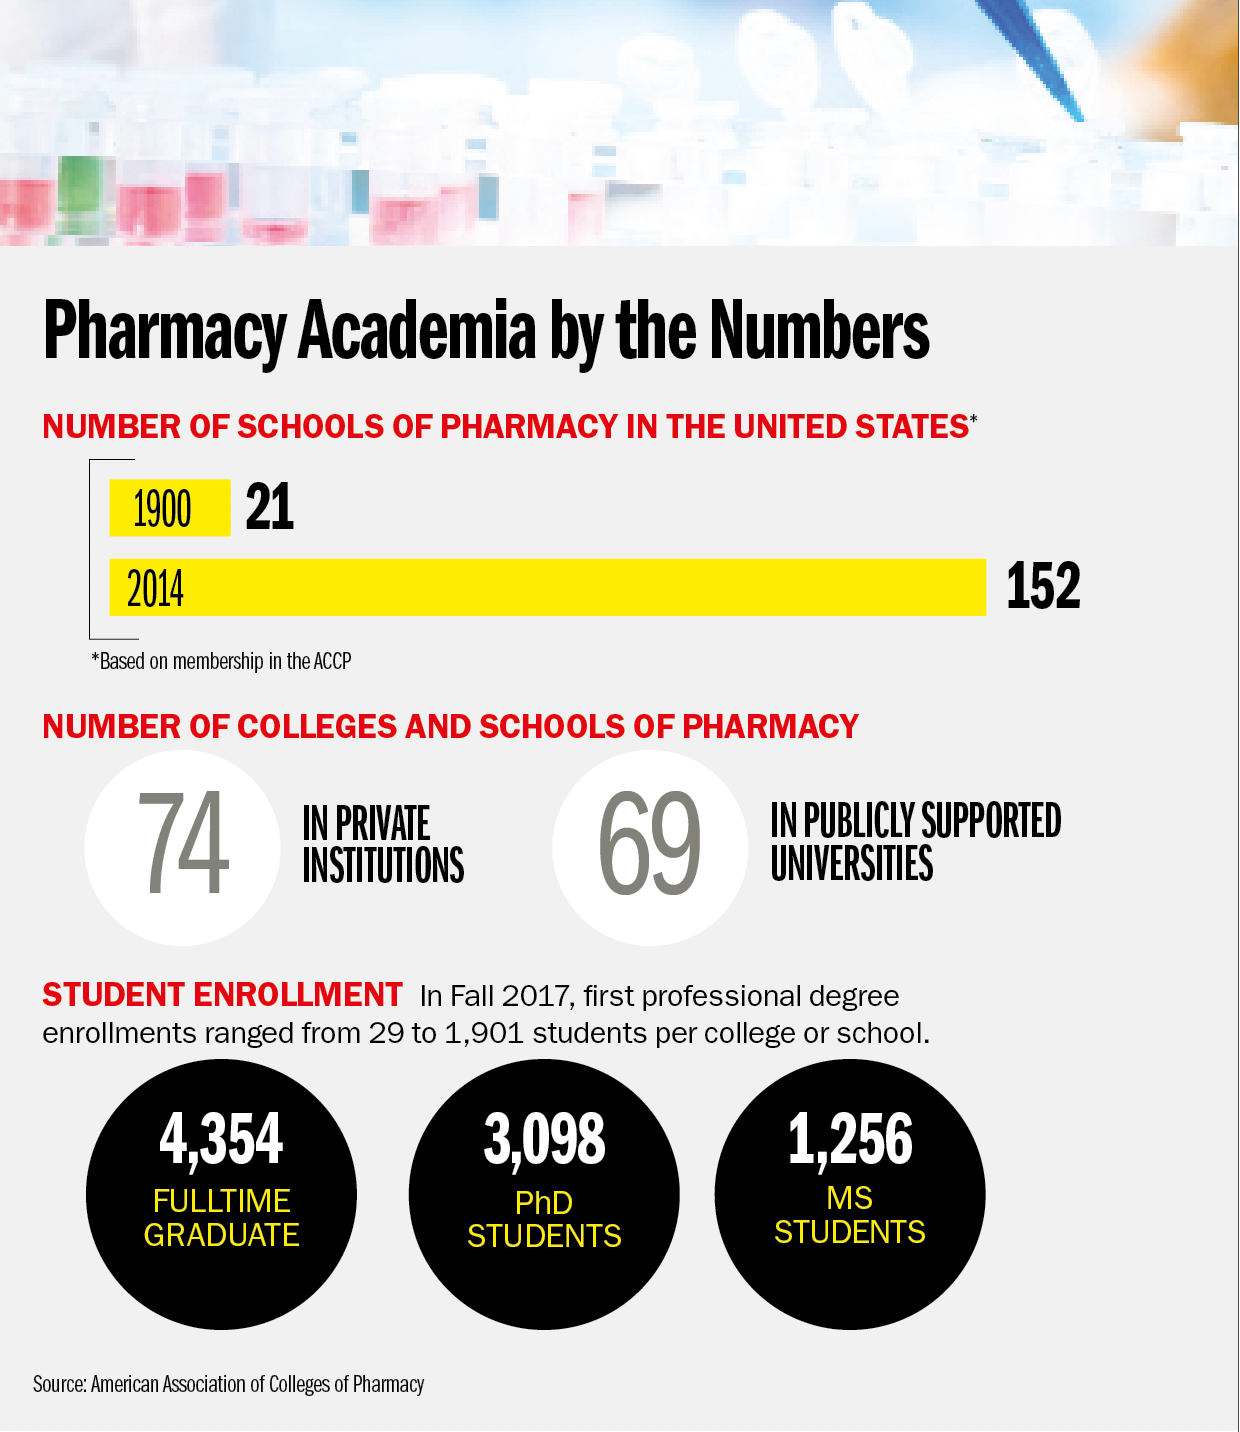 Pharmacy Education By the Numbers